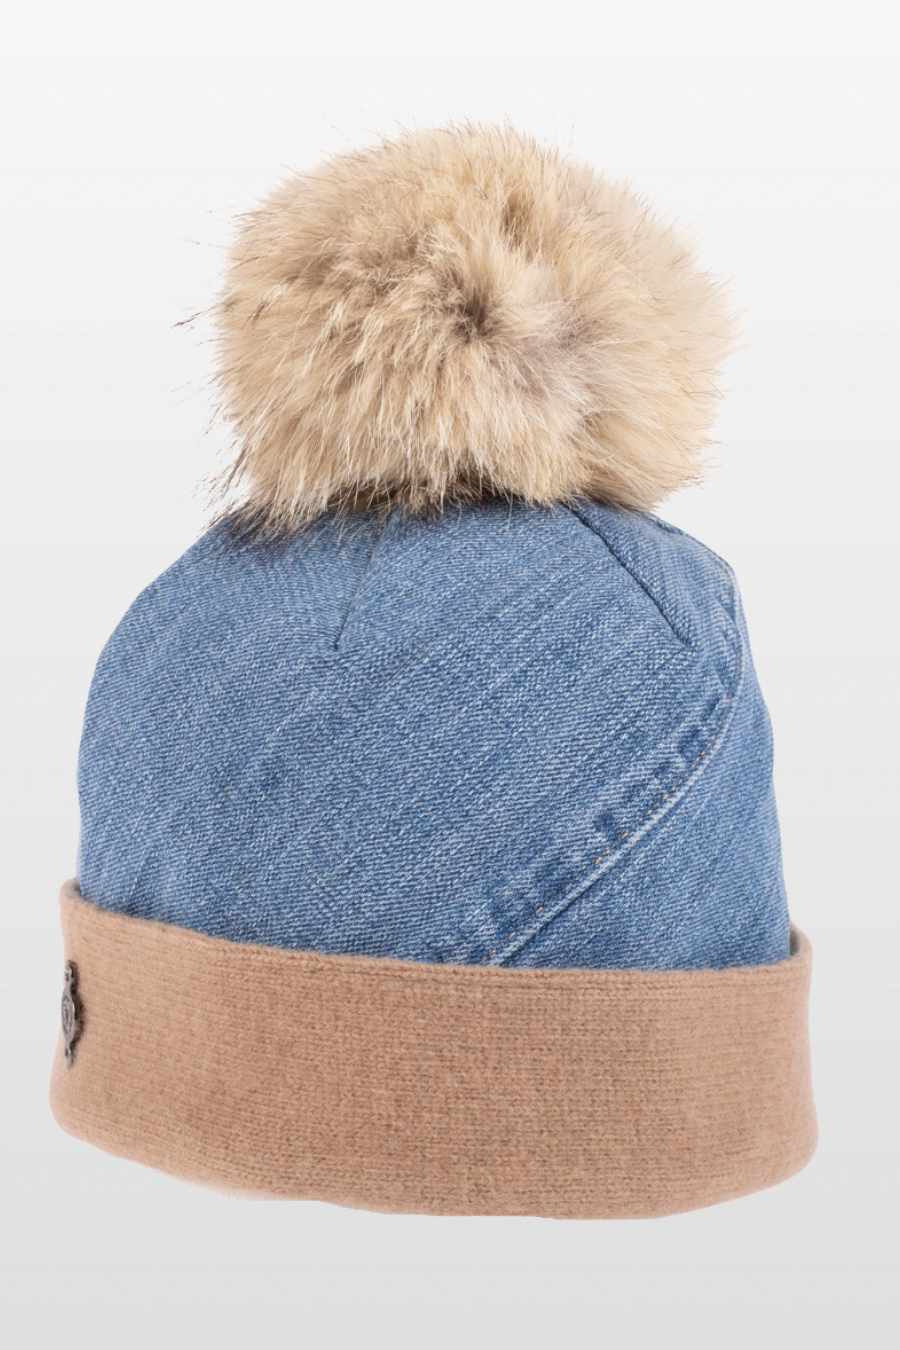 Up-cycled Jean and Fur Beanie